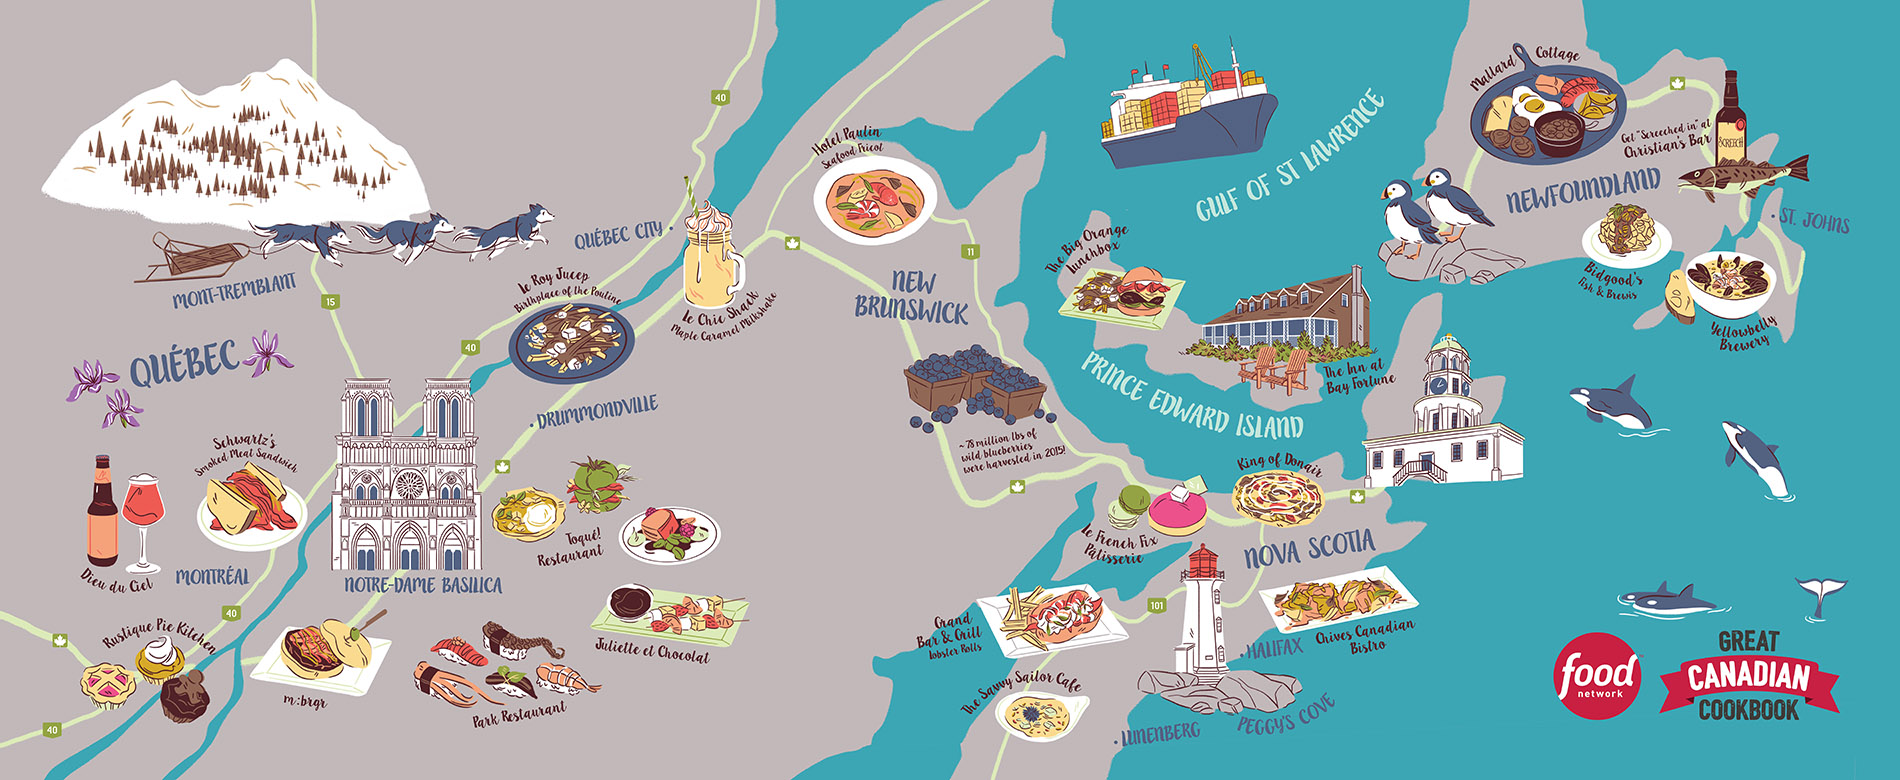 Great Canadian Cookbook - Quebec & The Maritimes